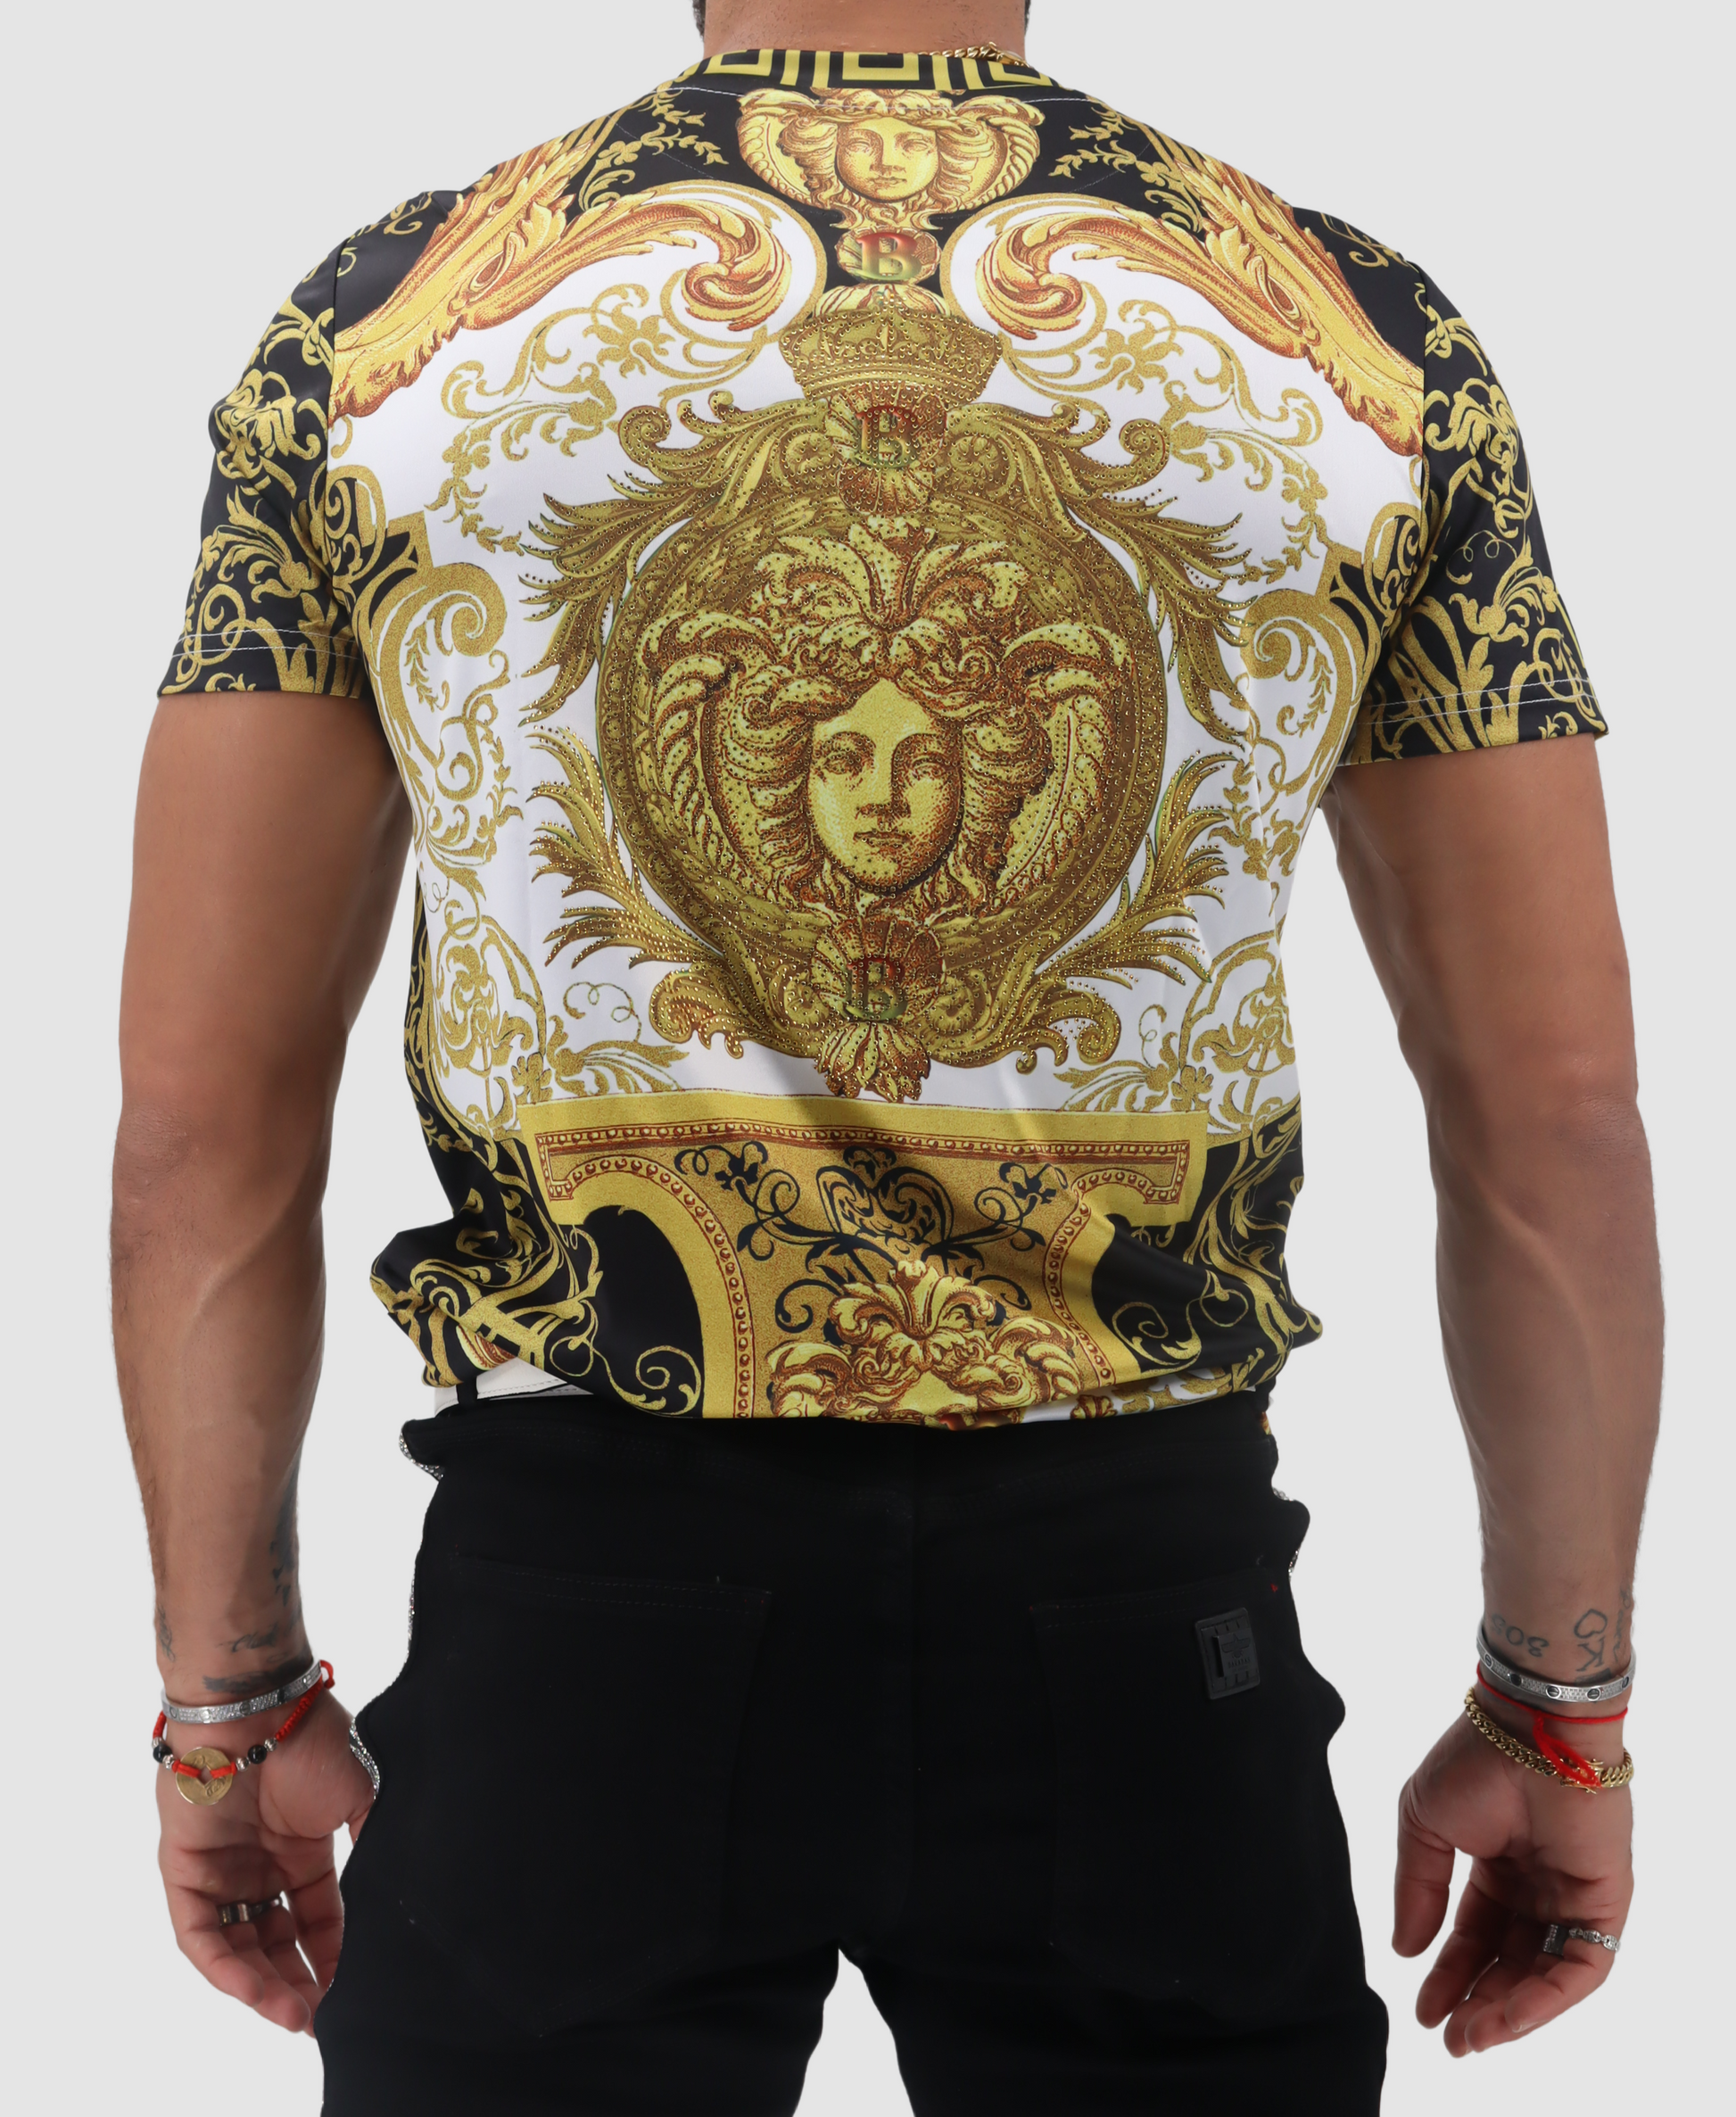 Barabas The Black/Gold T-Shirt is a fashionable choice for everyday wear or a special occasion.